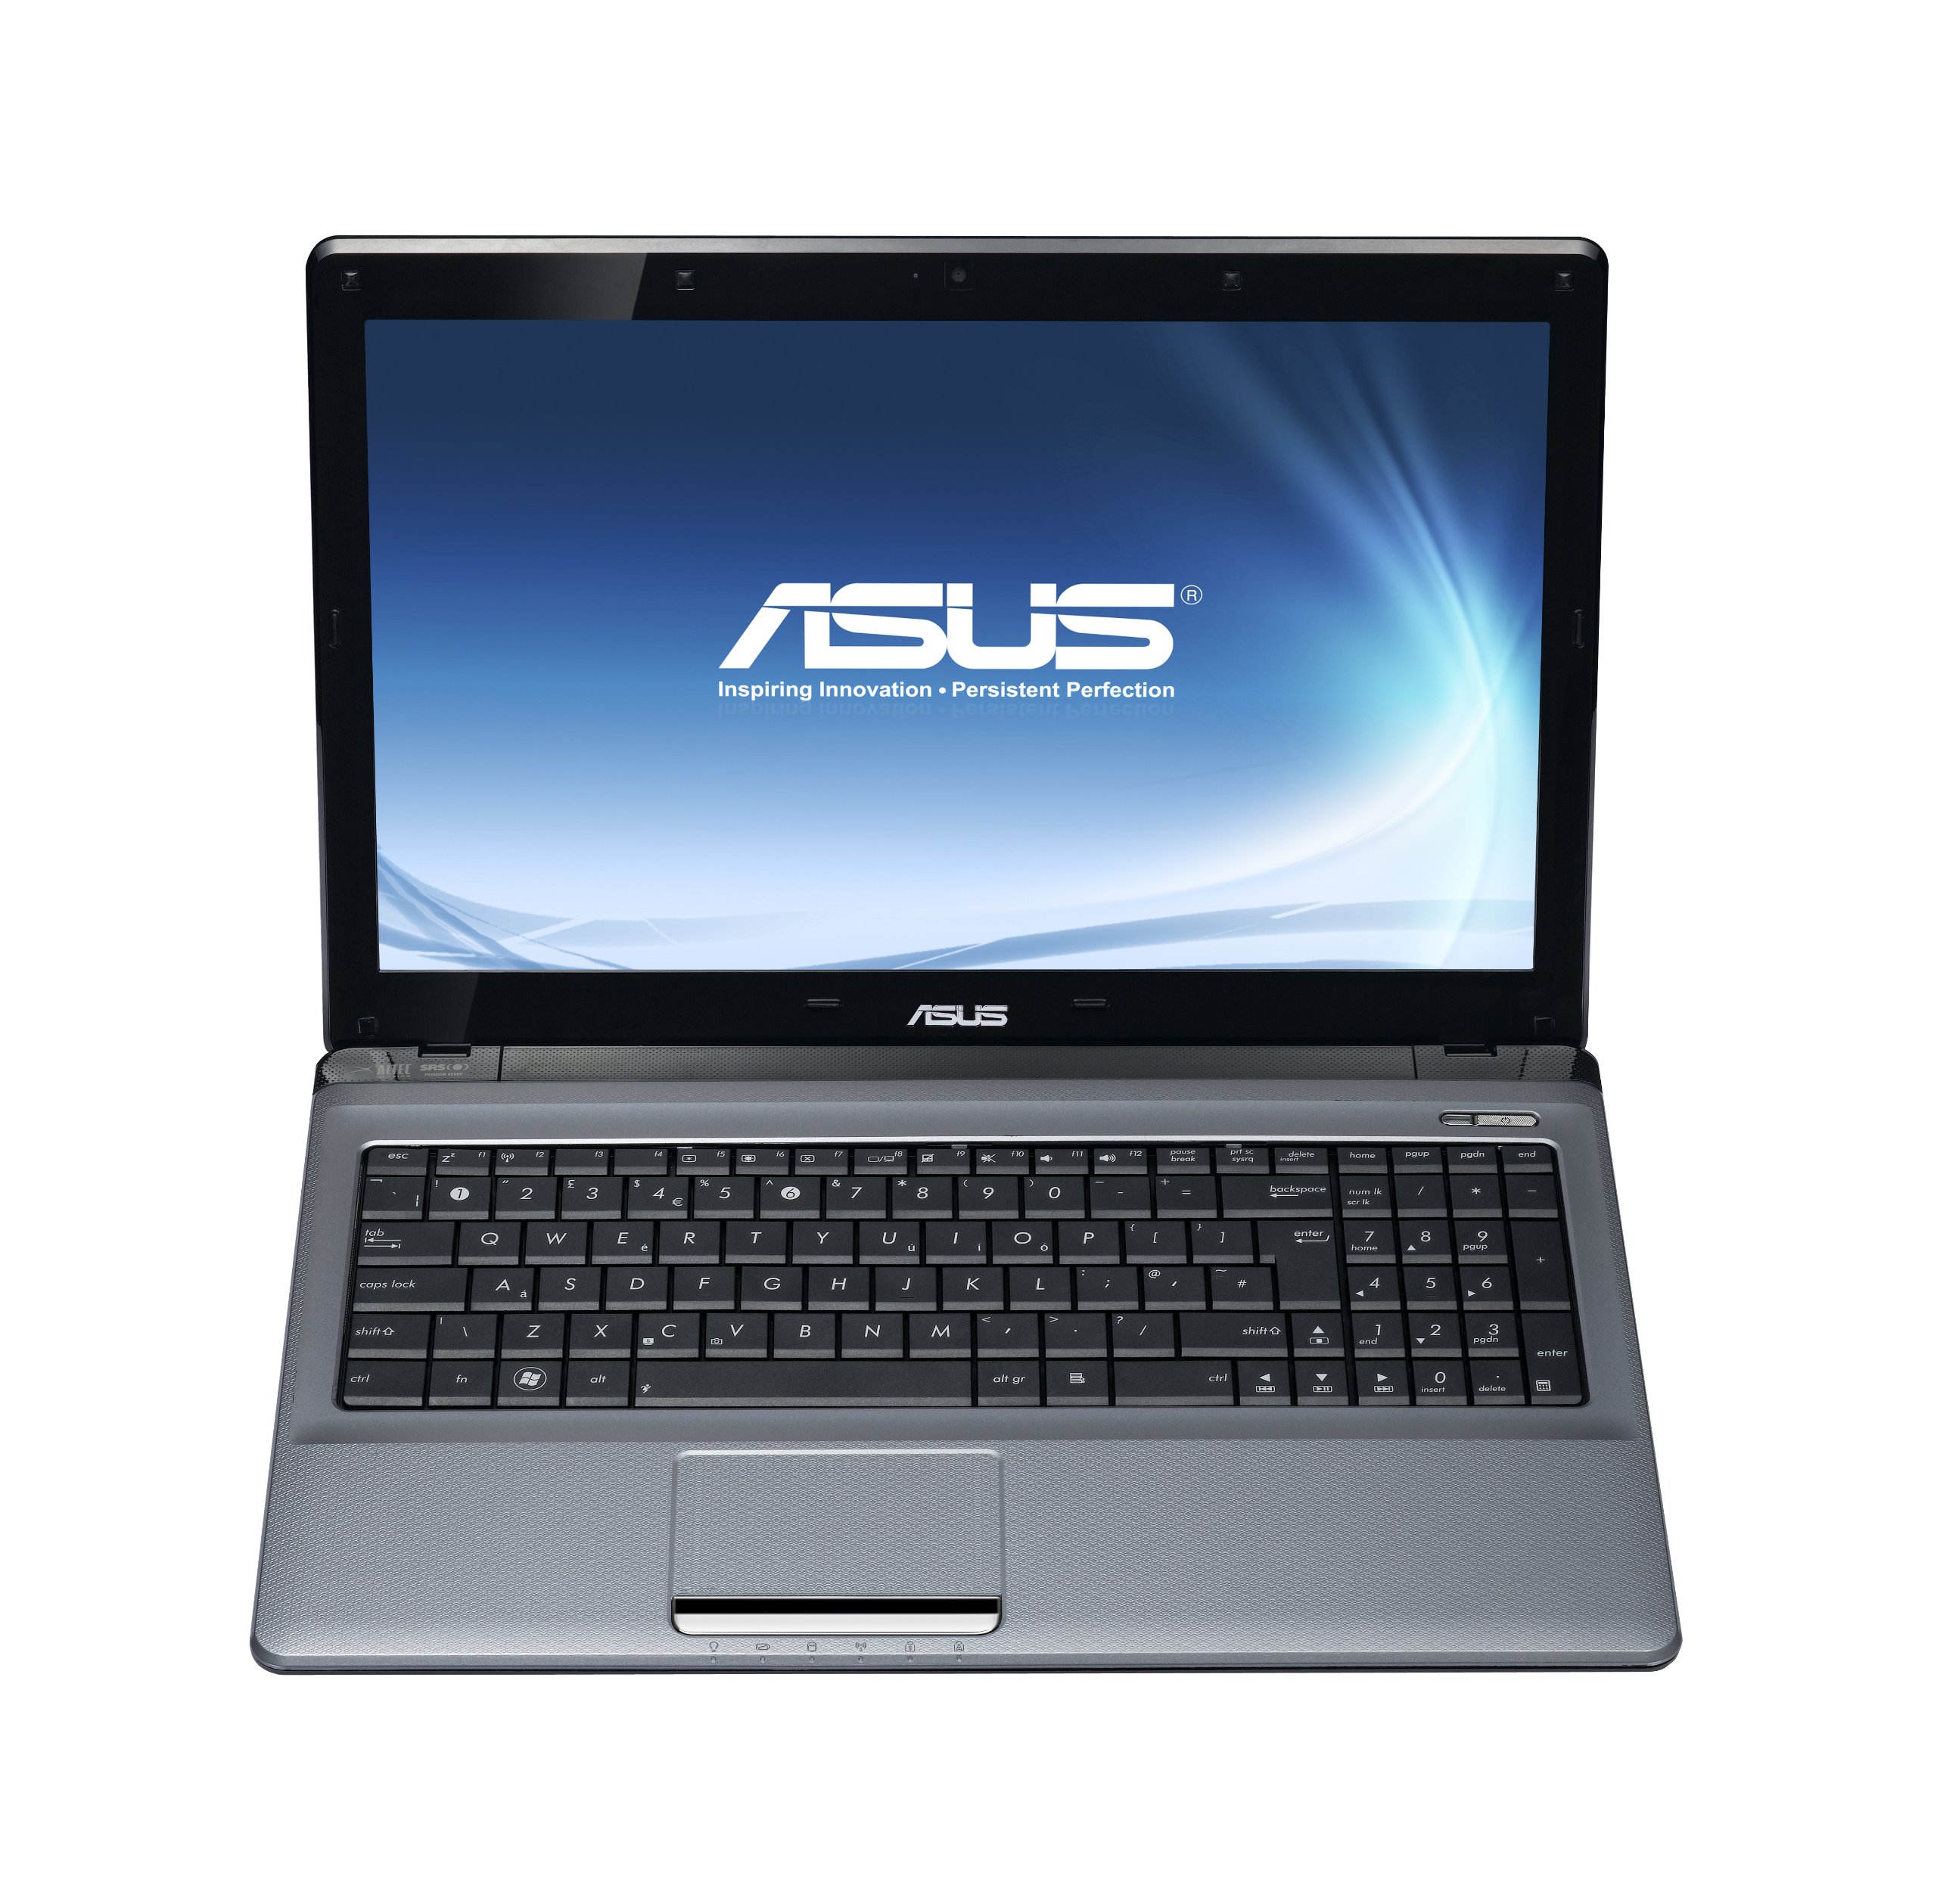 Asus A73SV Notebook